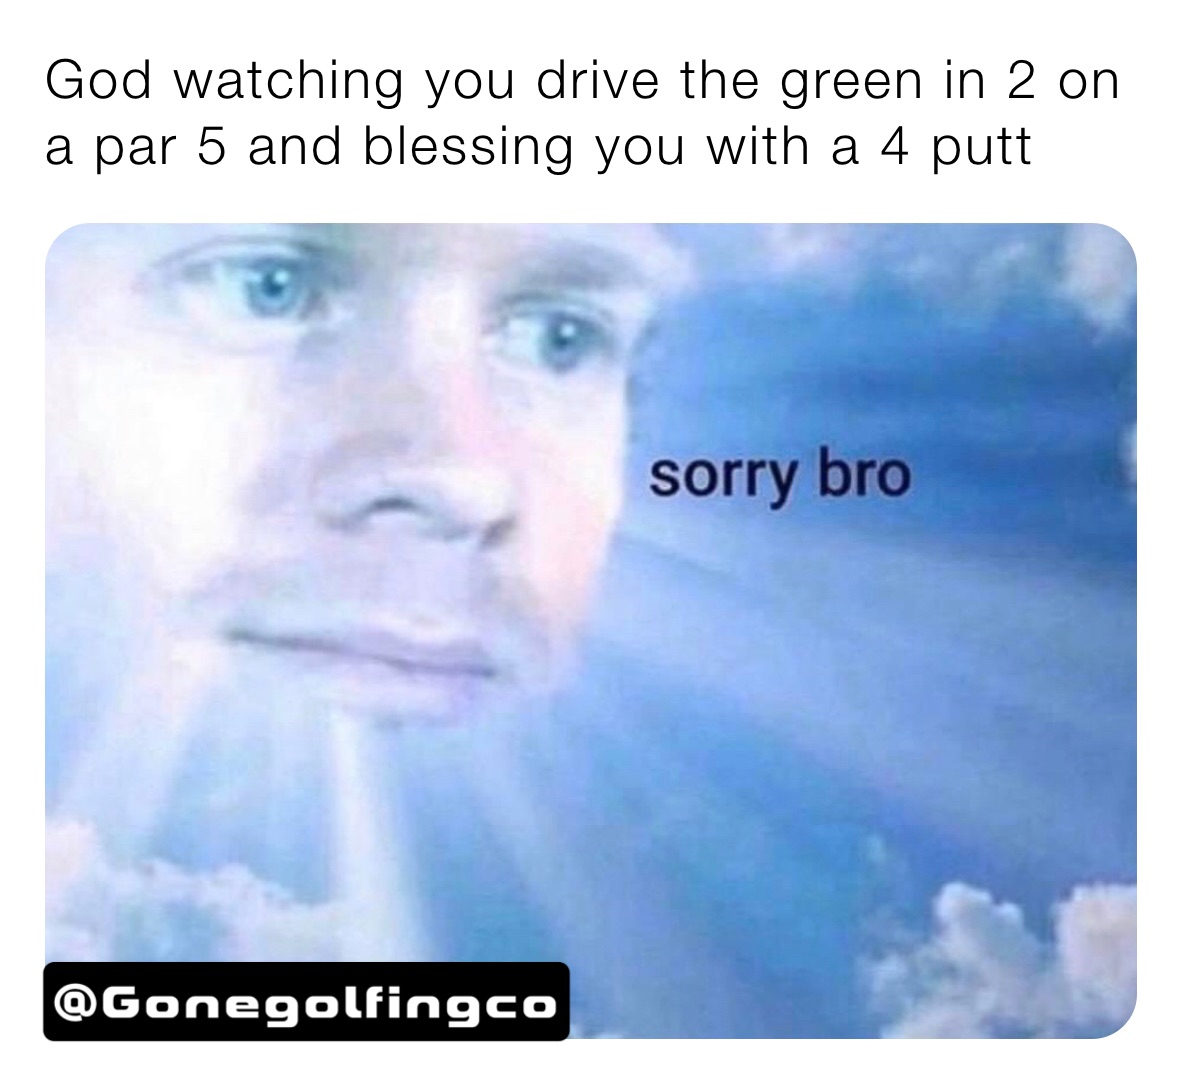 God watching you drive the green in 2 on a par 5 and blessing you with a 4 putt 